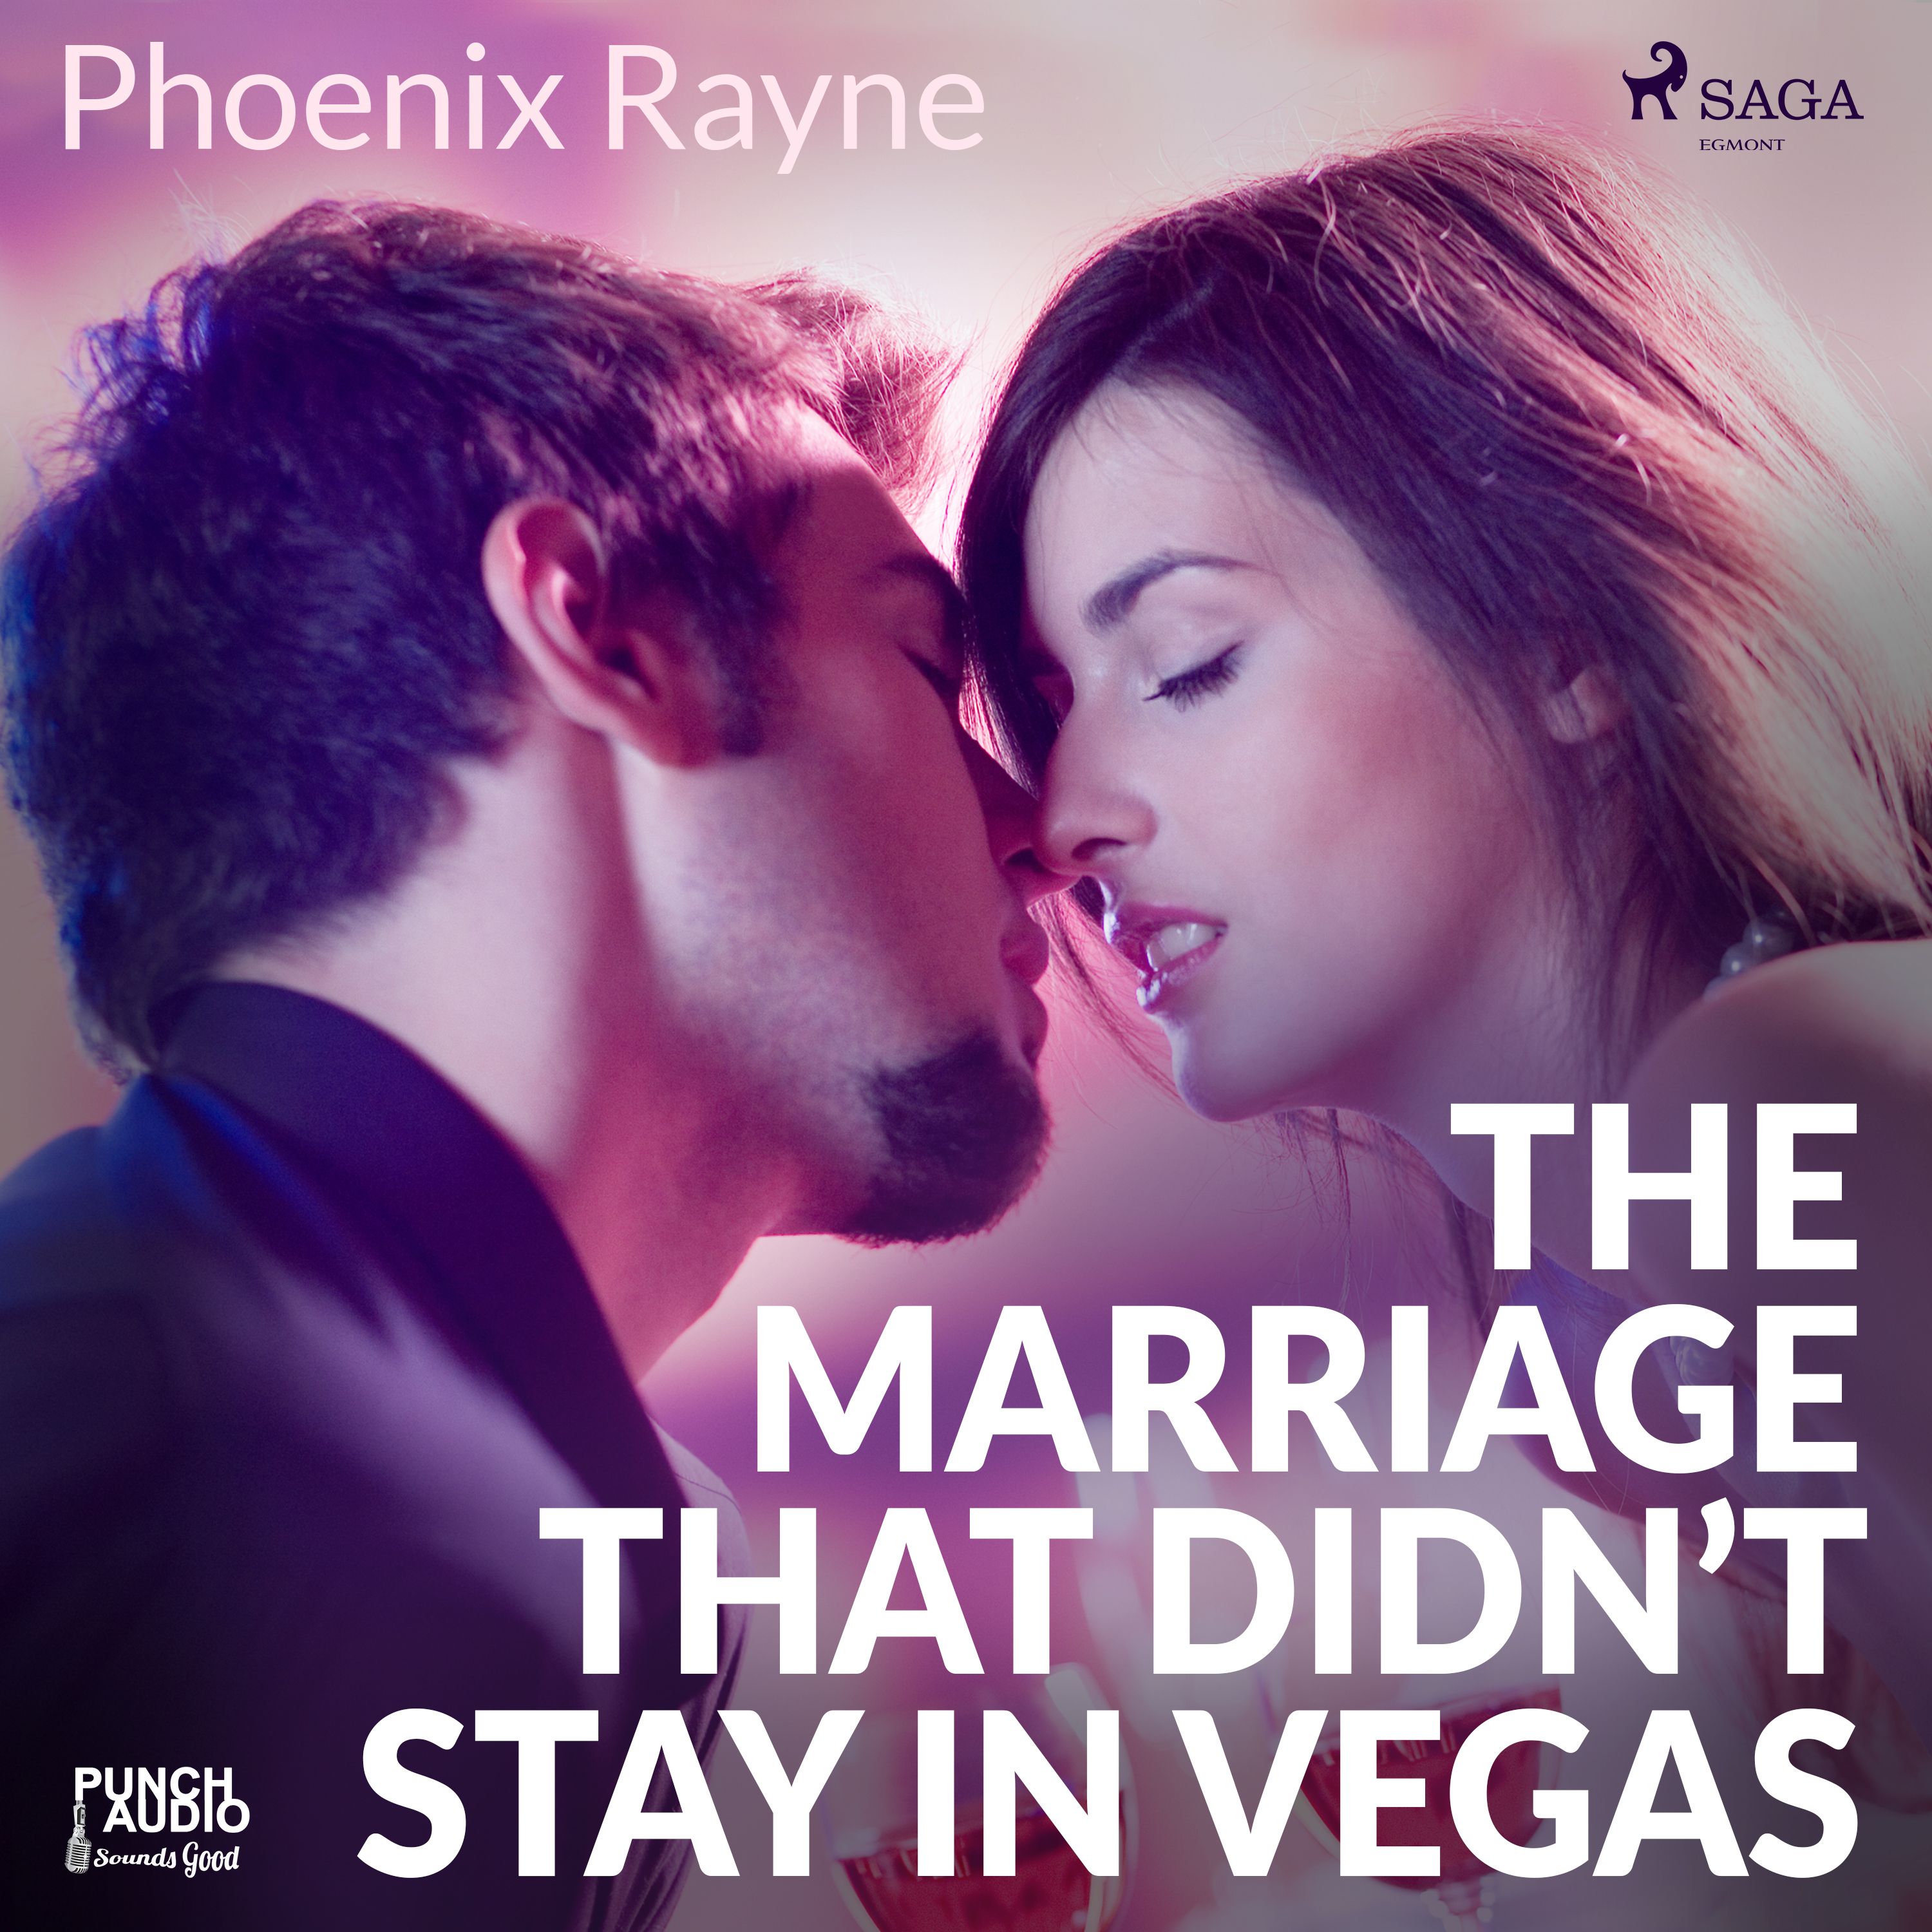 The Marriage That Didn’t Stay In Vegas, lydbog af Phoenix Rayne